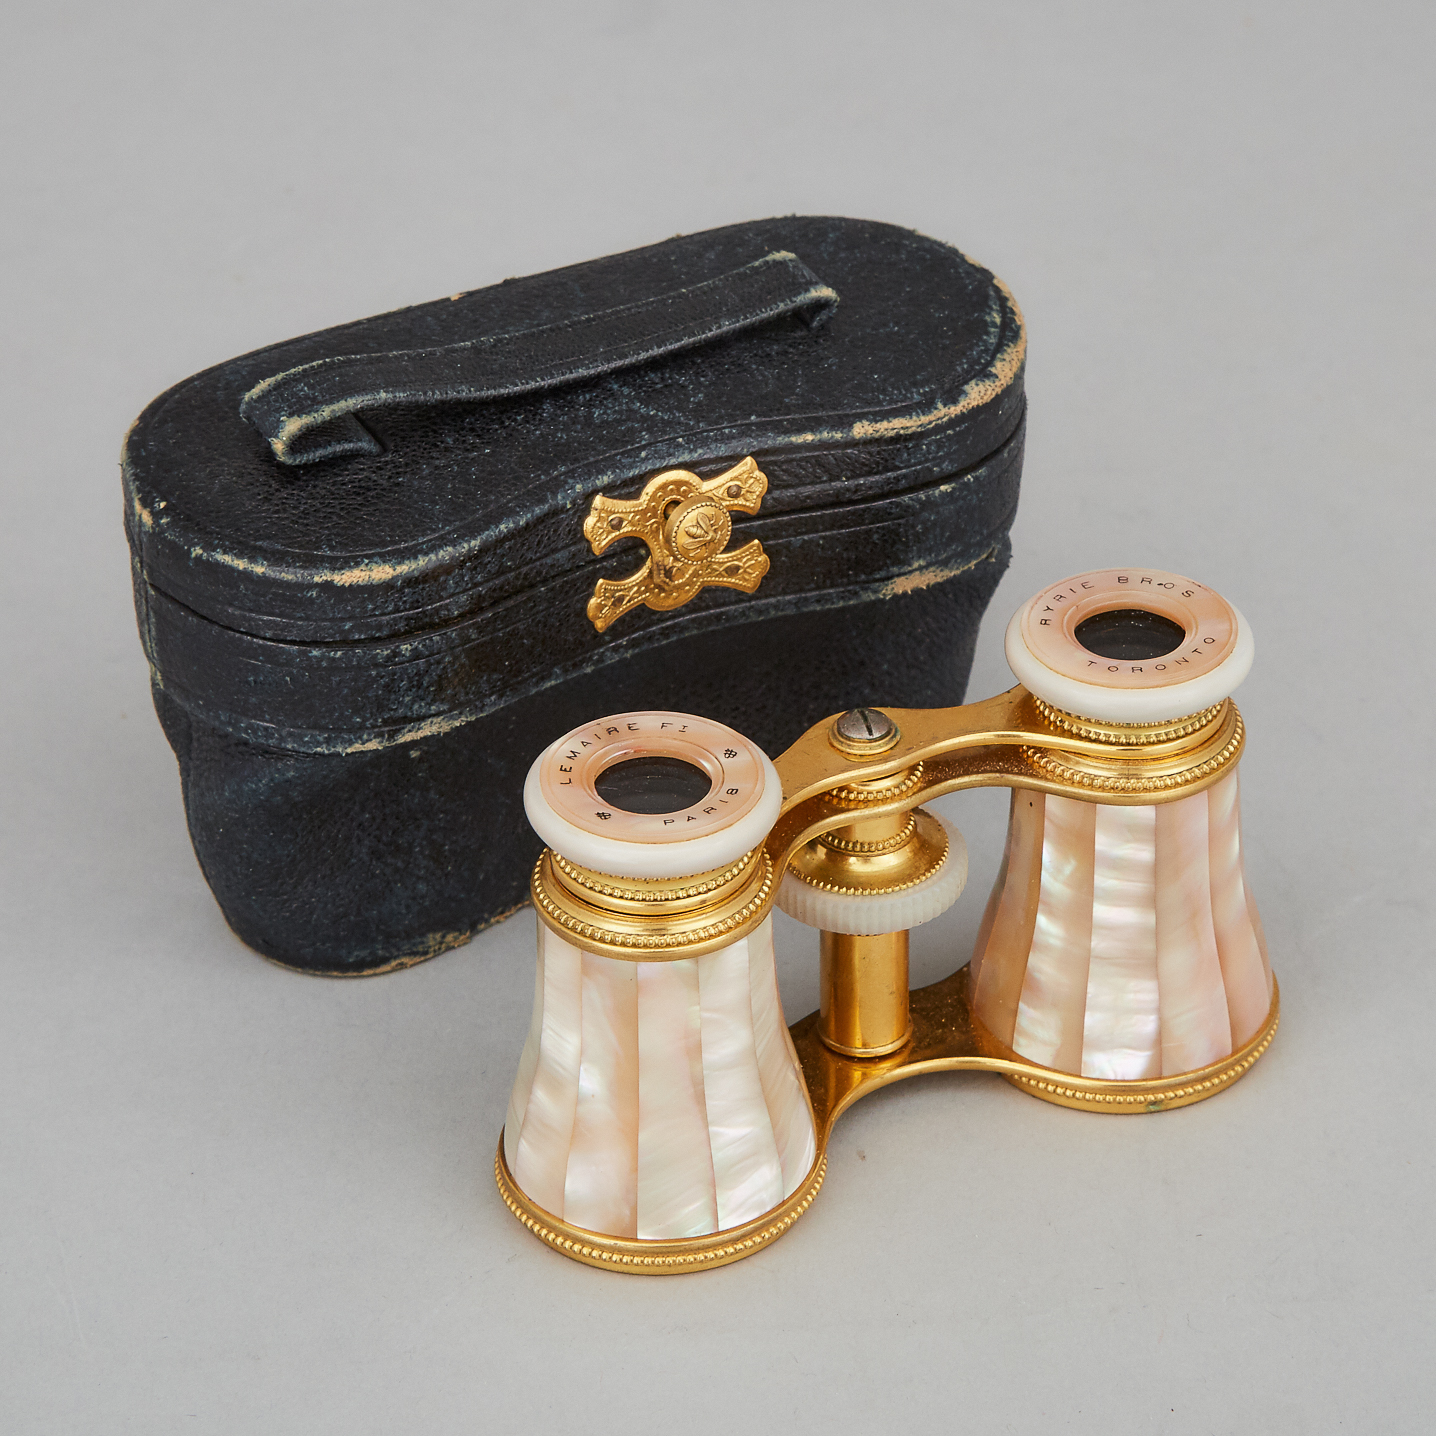 Pair of Abalone Veneered Gilt Brass Opera Glasses by LeMaire, Paris